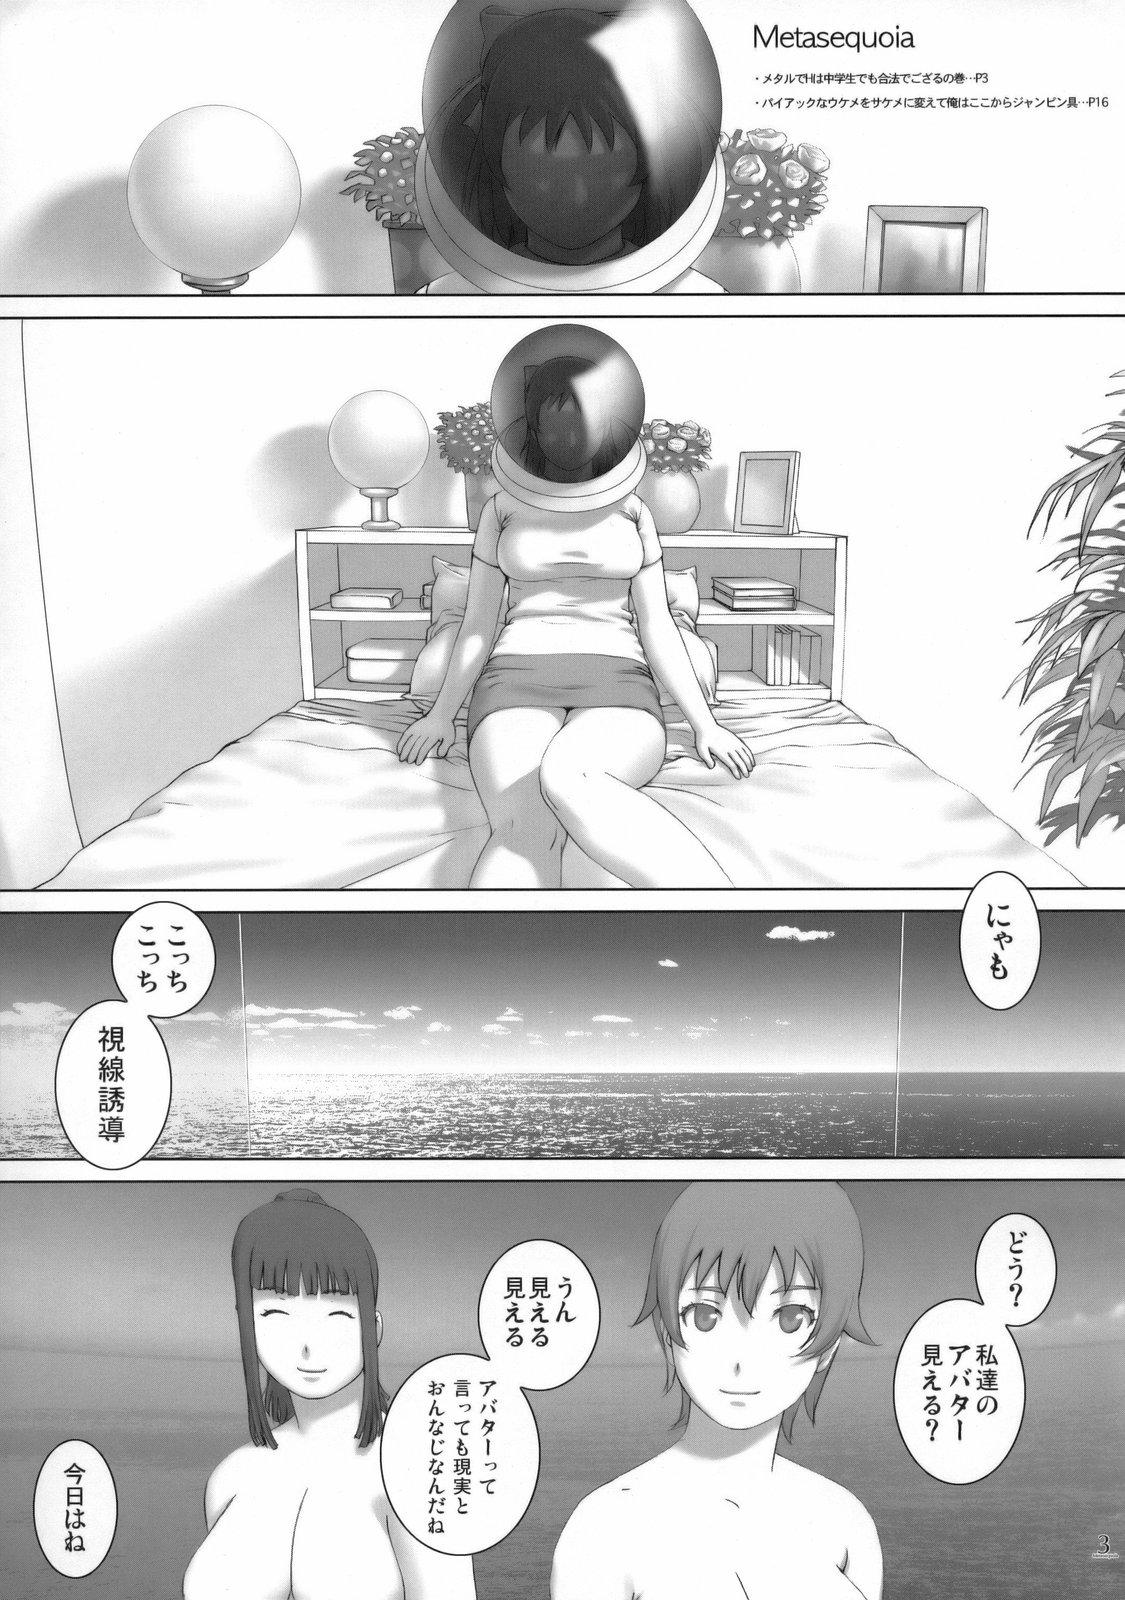 Spandex Metasequoia - Real drive Big Ass - Page 2